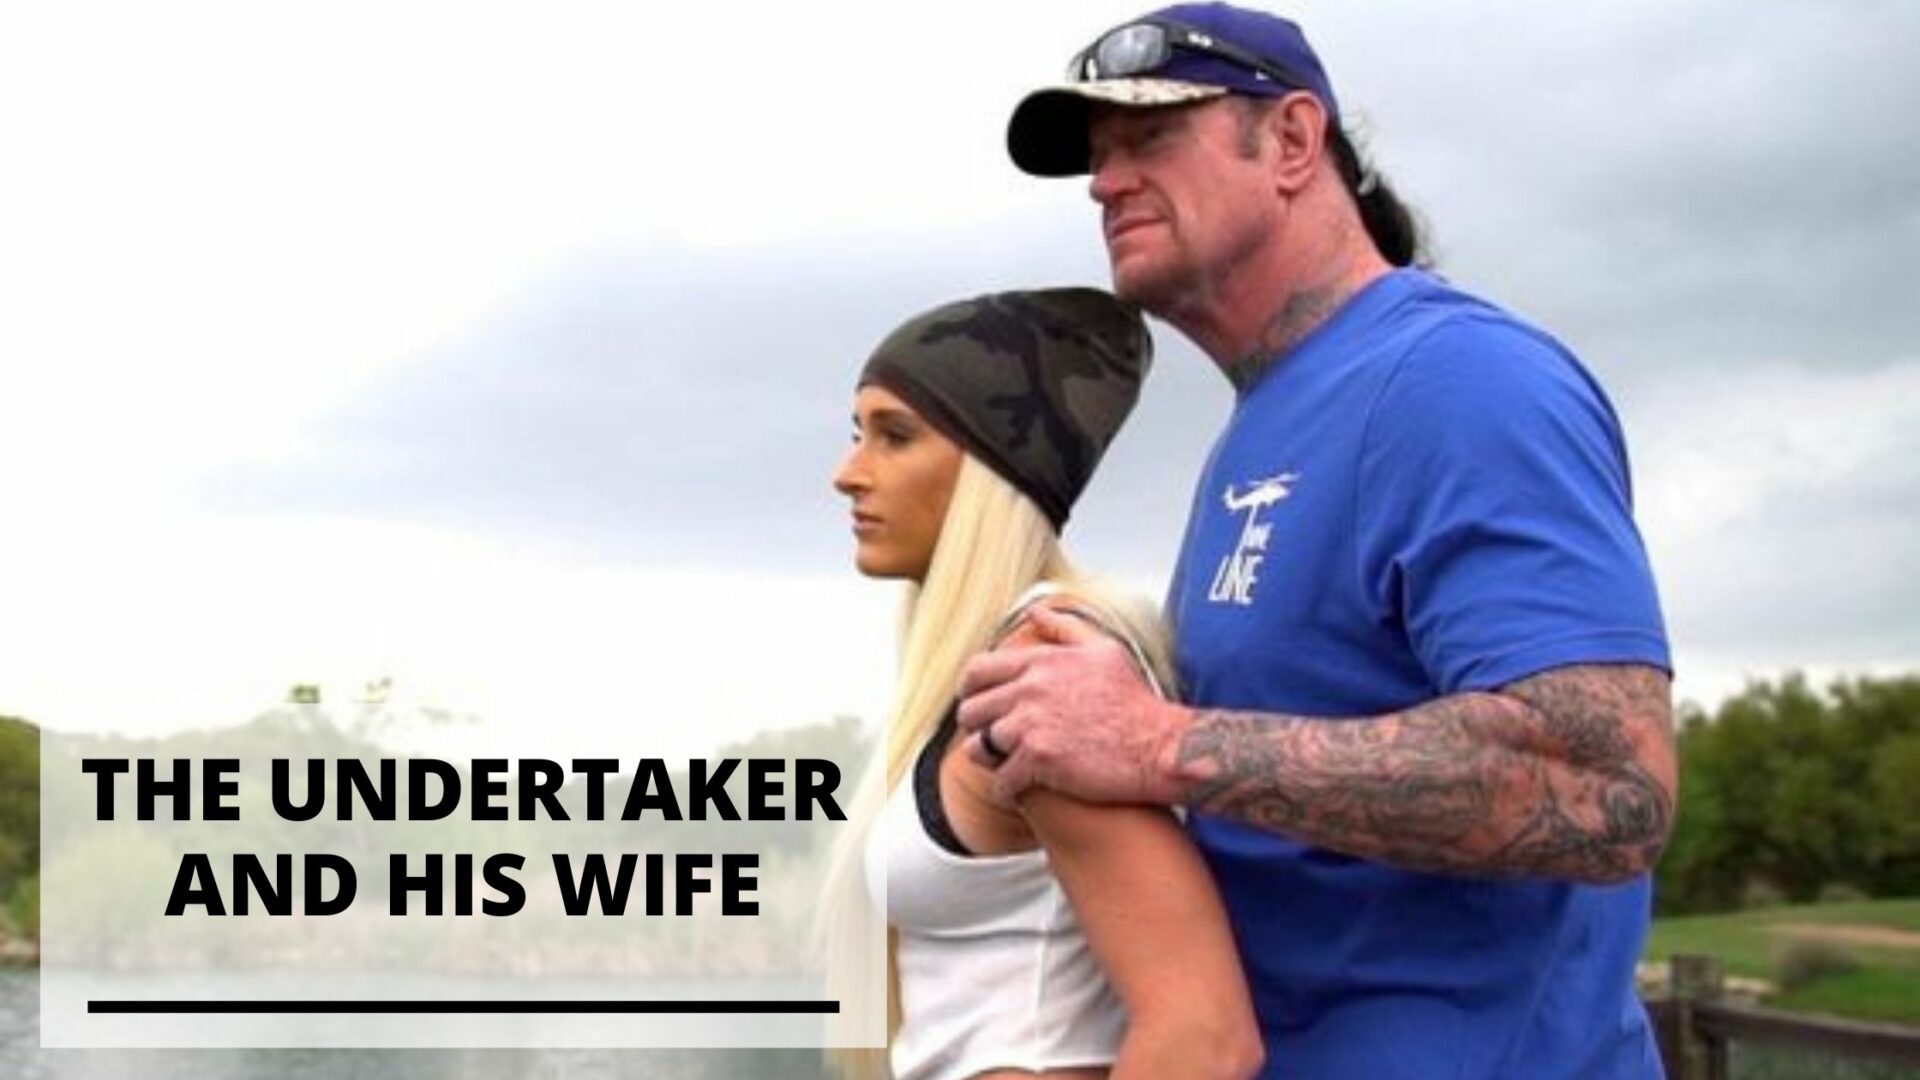 The Undertaker and His Wife